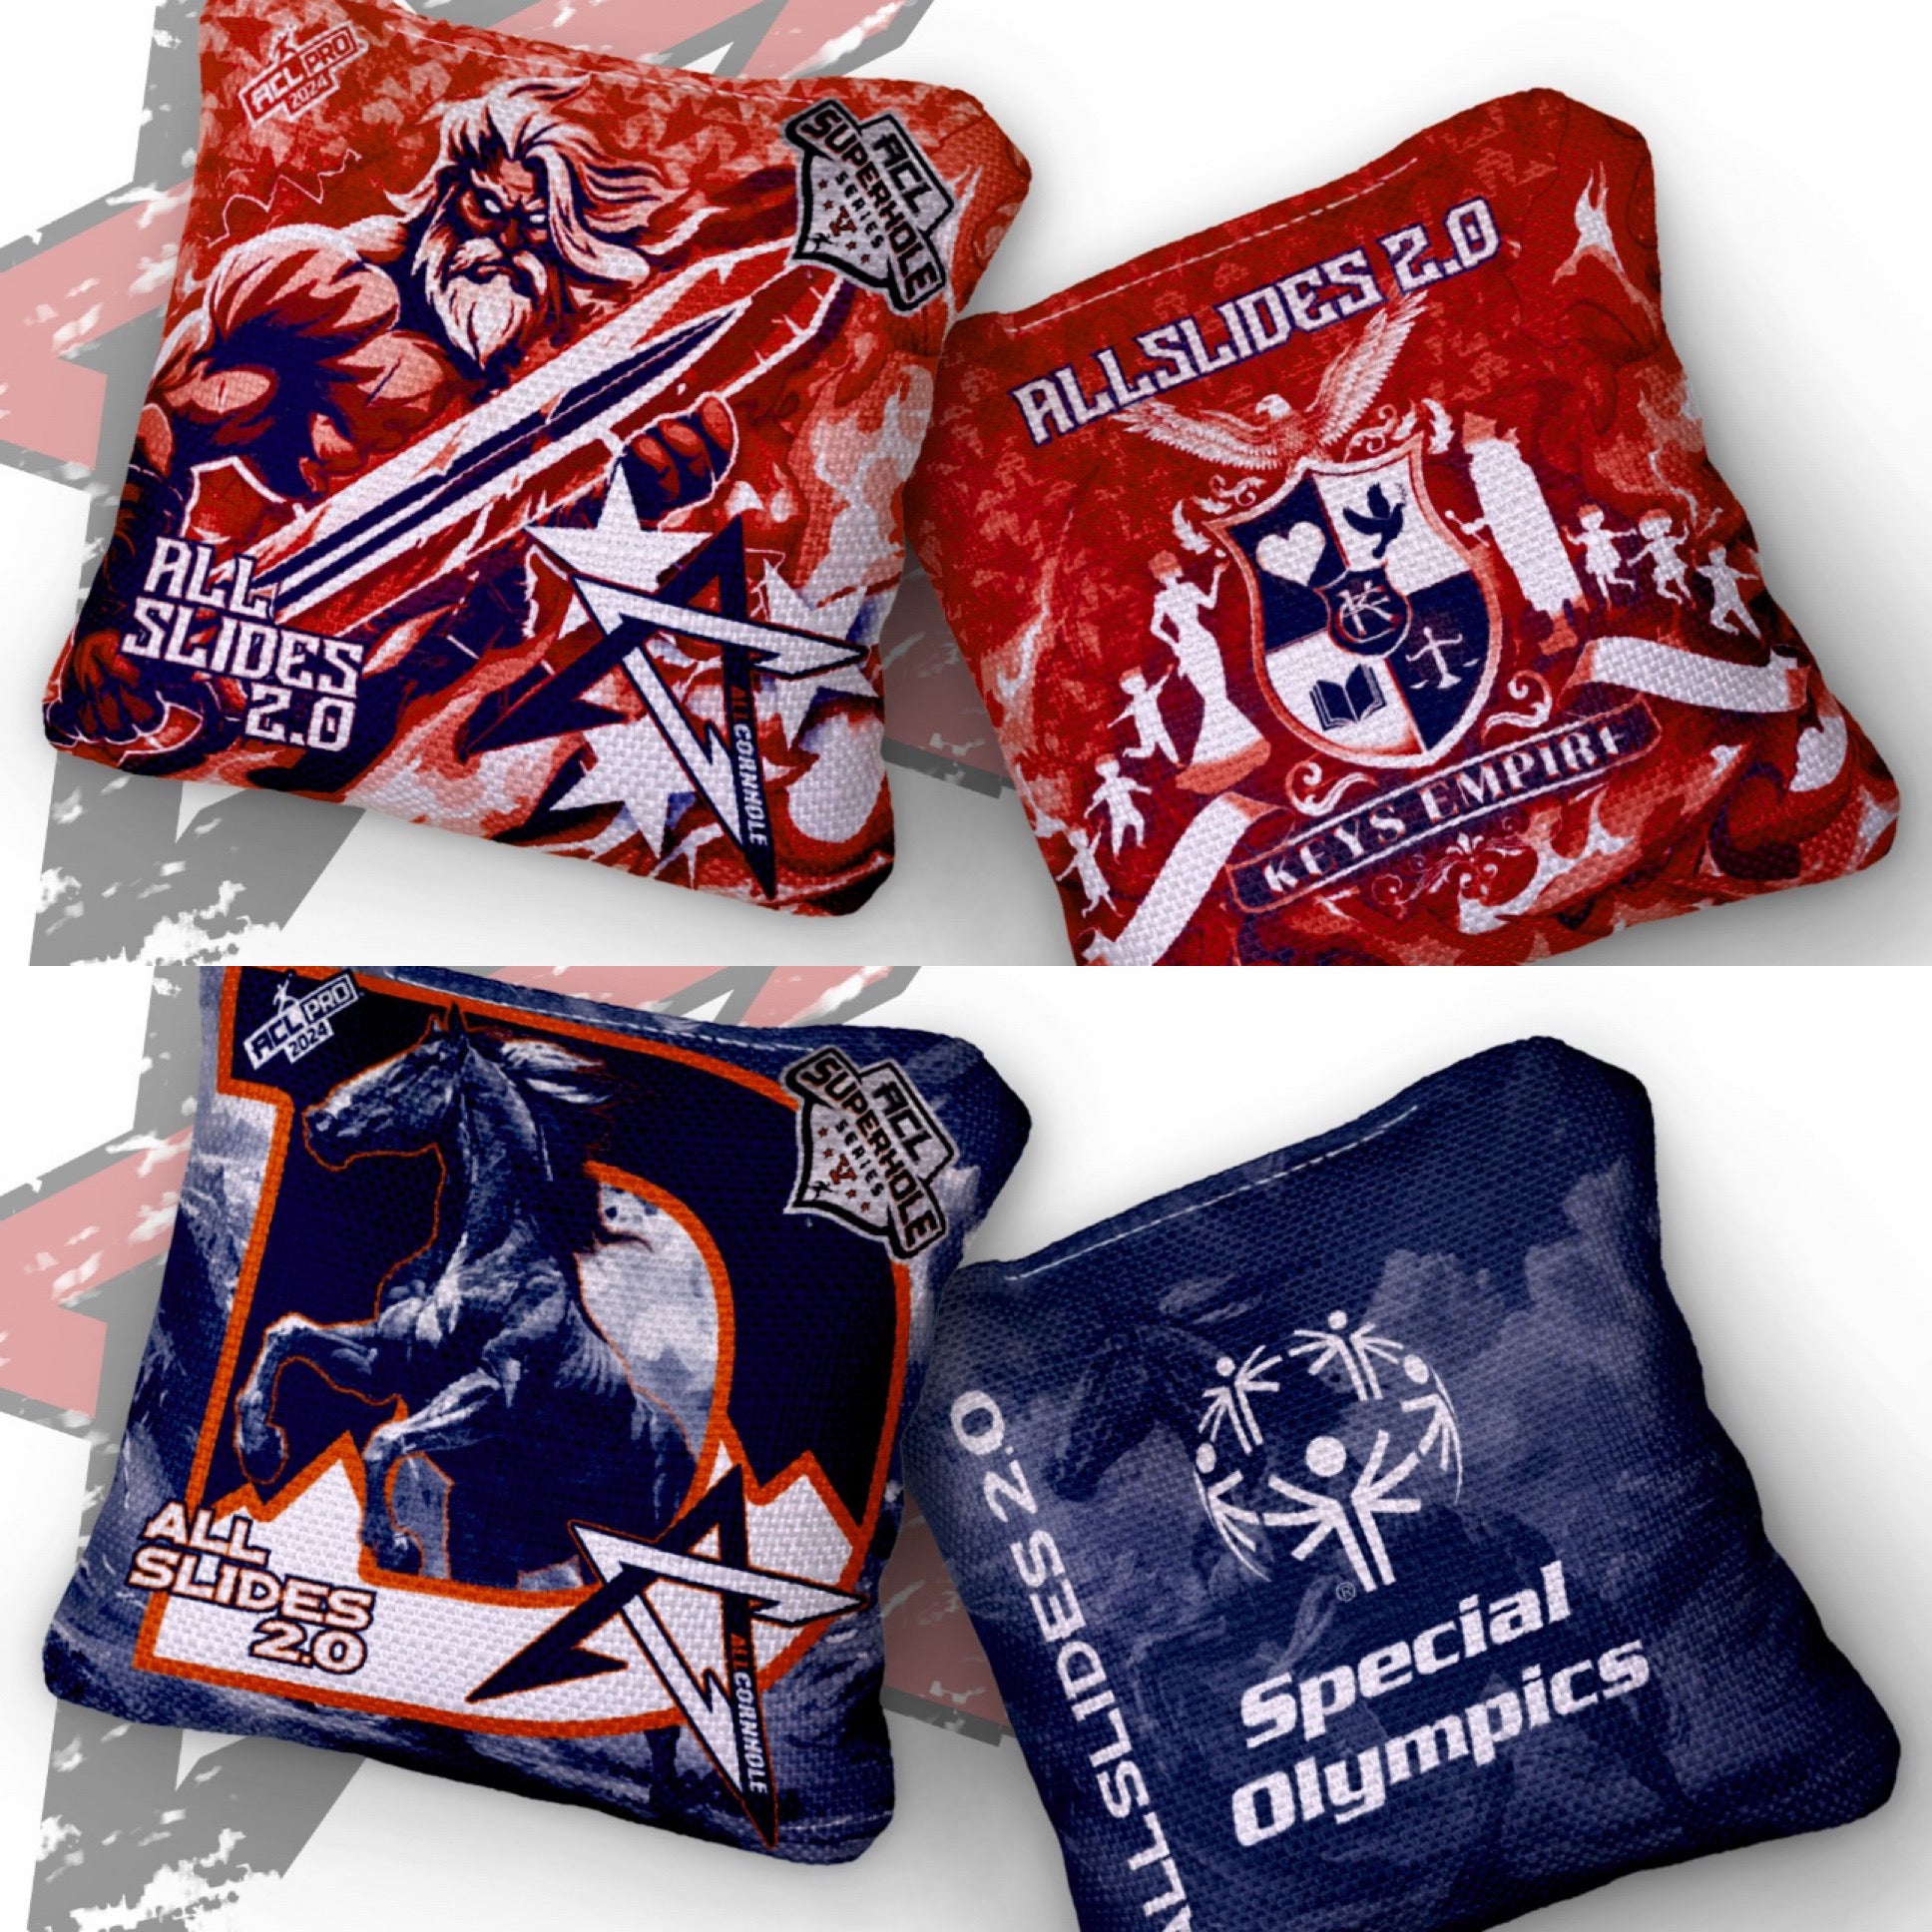 FUNDRAISER - 2024 AllCornhole "My Bags My Cause” - ESPN SuperHole Bags - ACL Pro Stamped Cornhole Bags - SET OF 4 BAGS